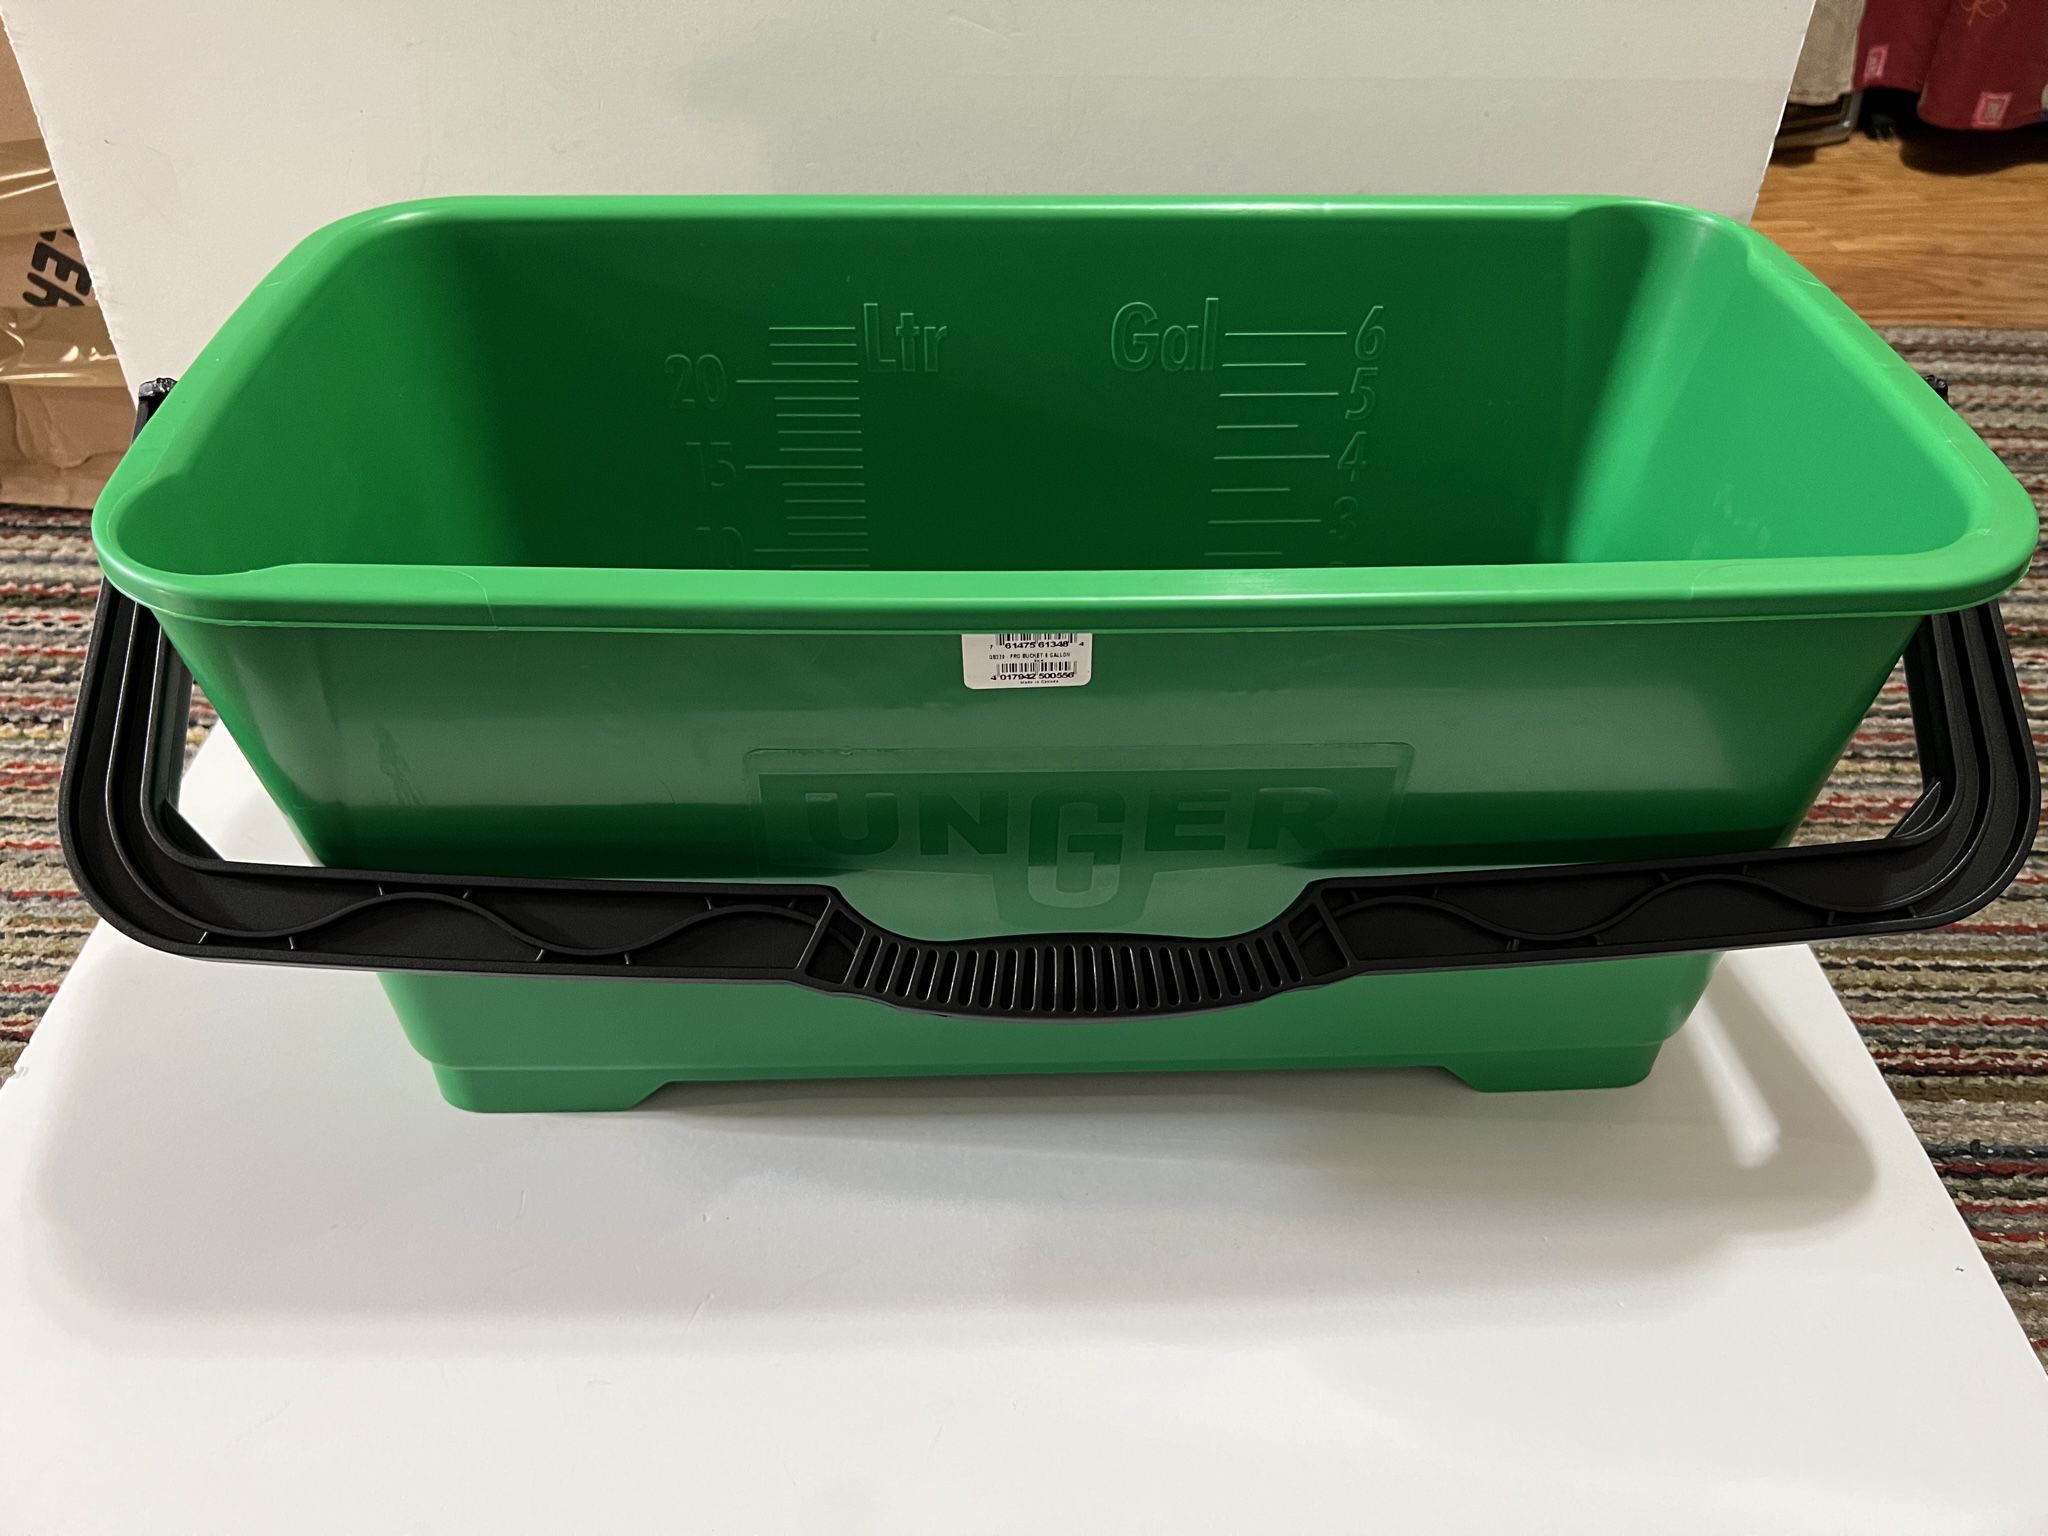 Unger Pro Bucket, 6 gal, Plastic, Green QB220 UNGER Unger QB(contact info removed)13484